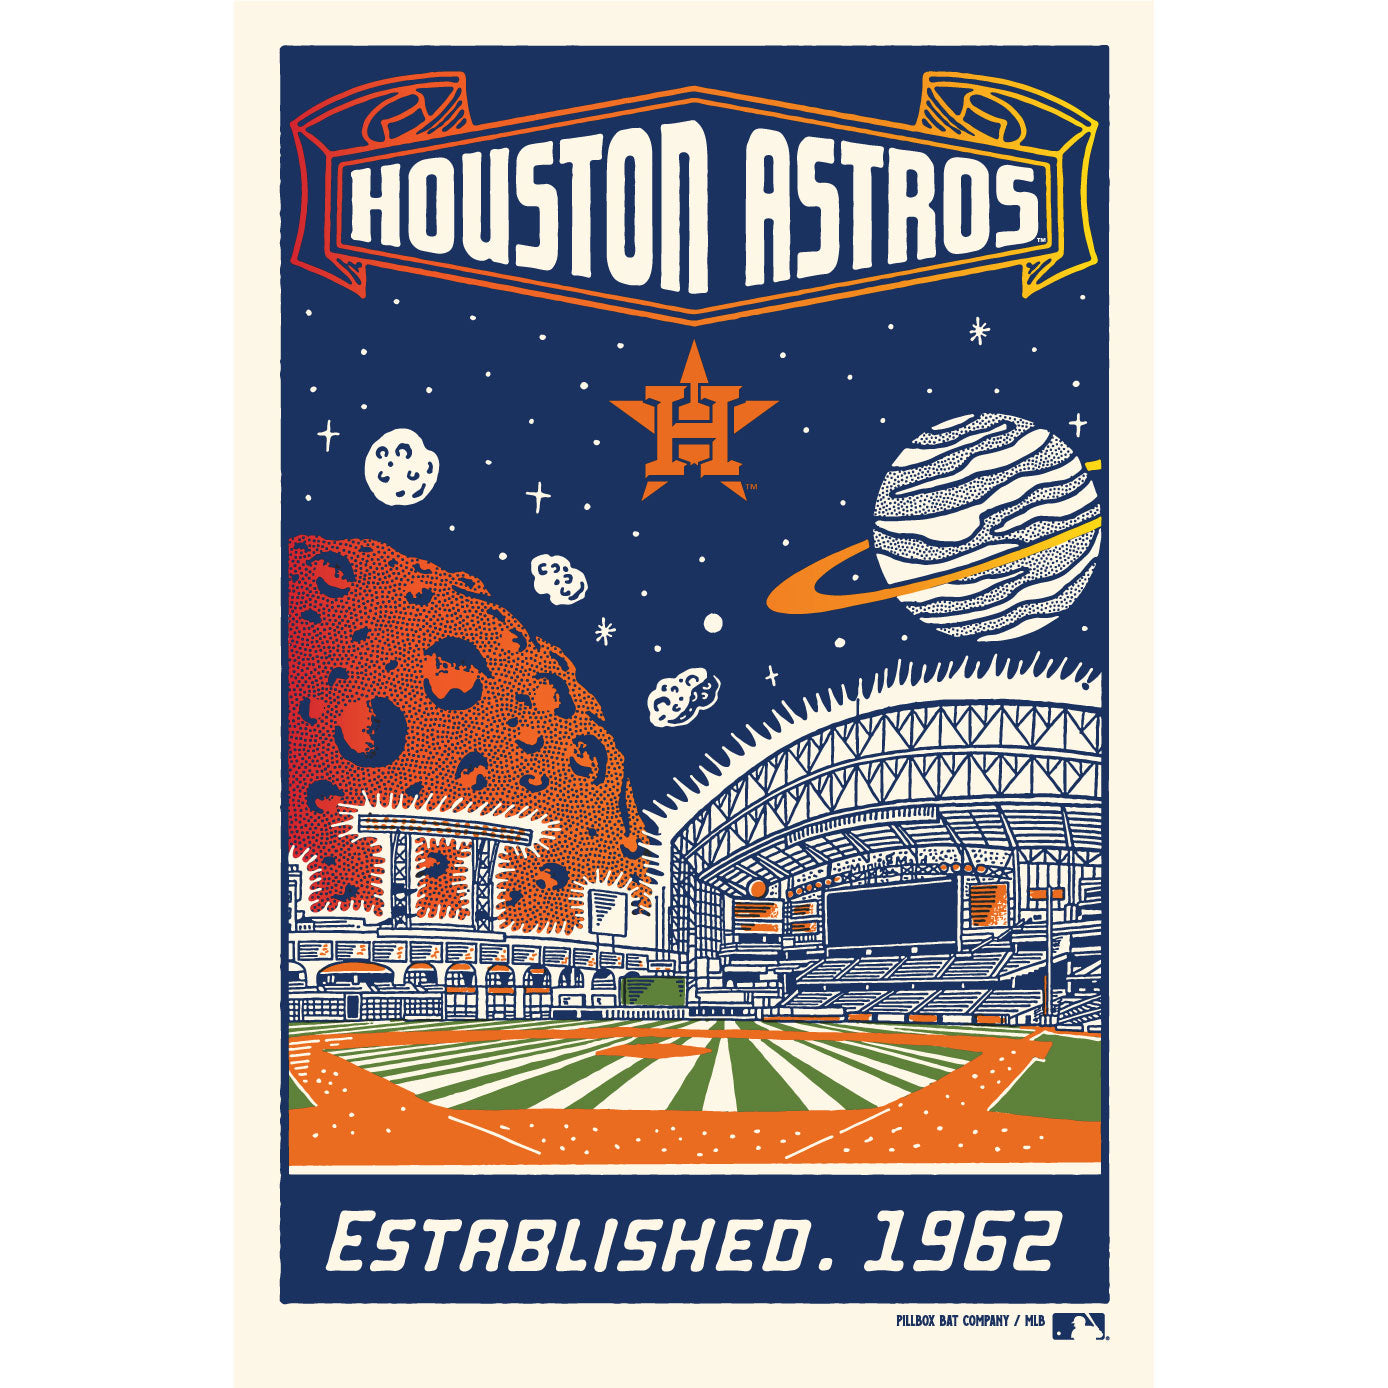 How to find Astros vintage gear 